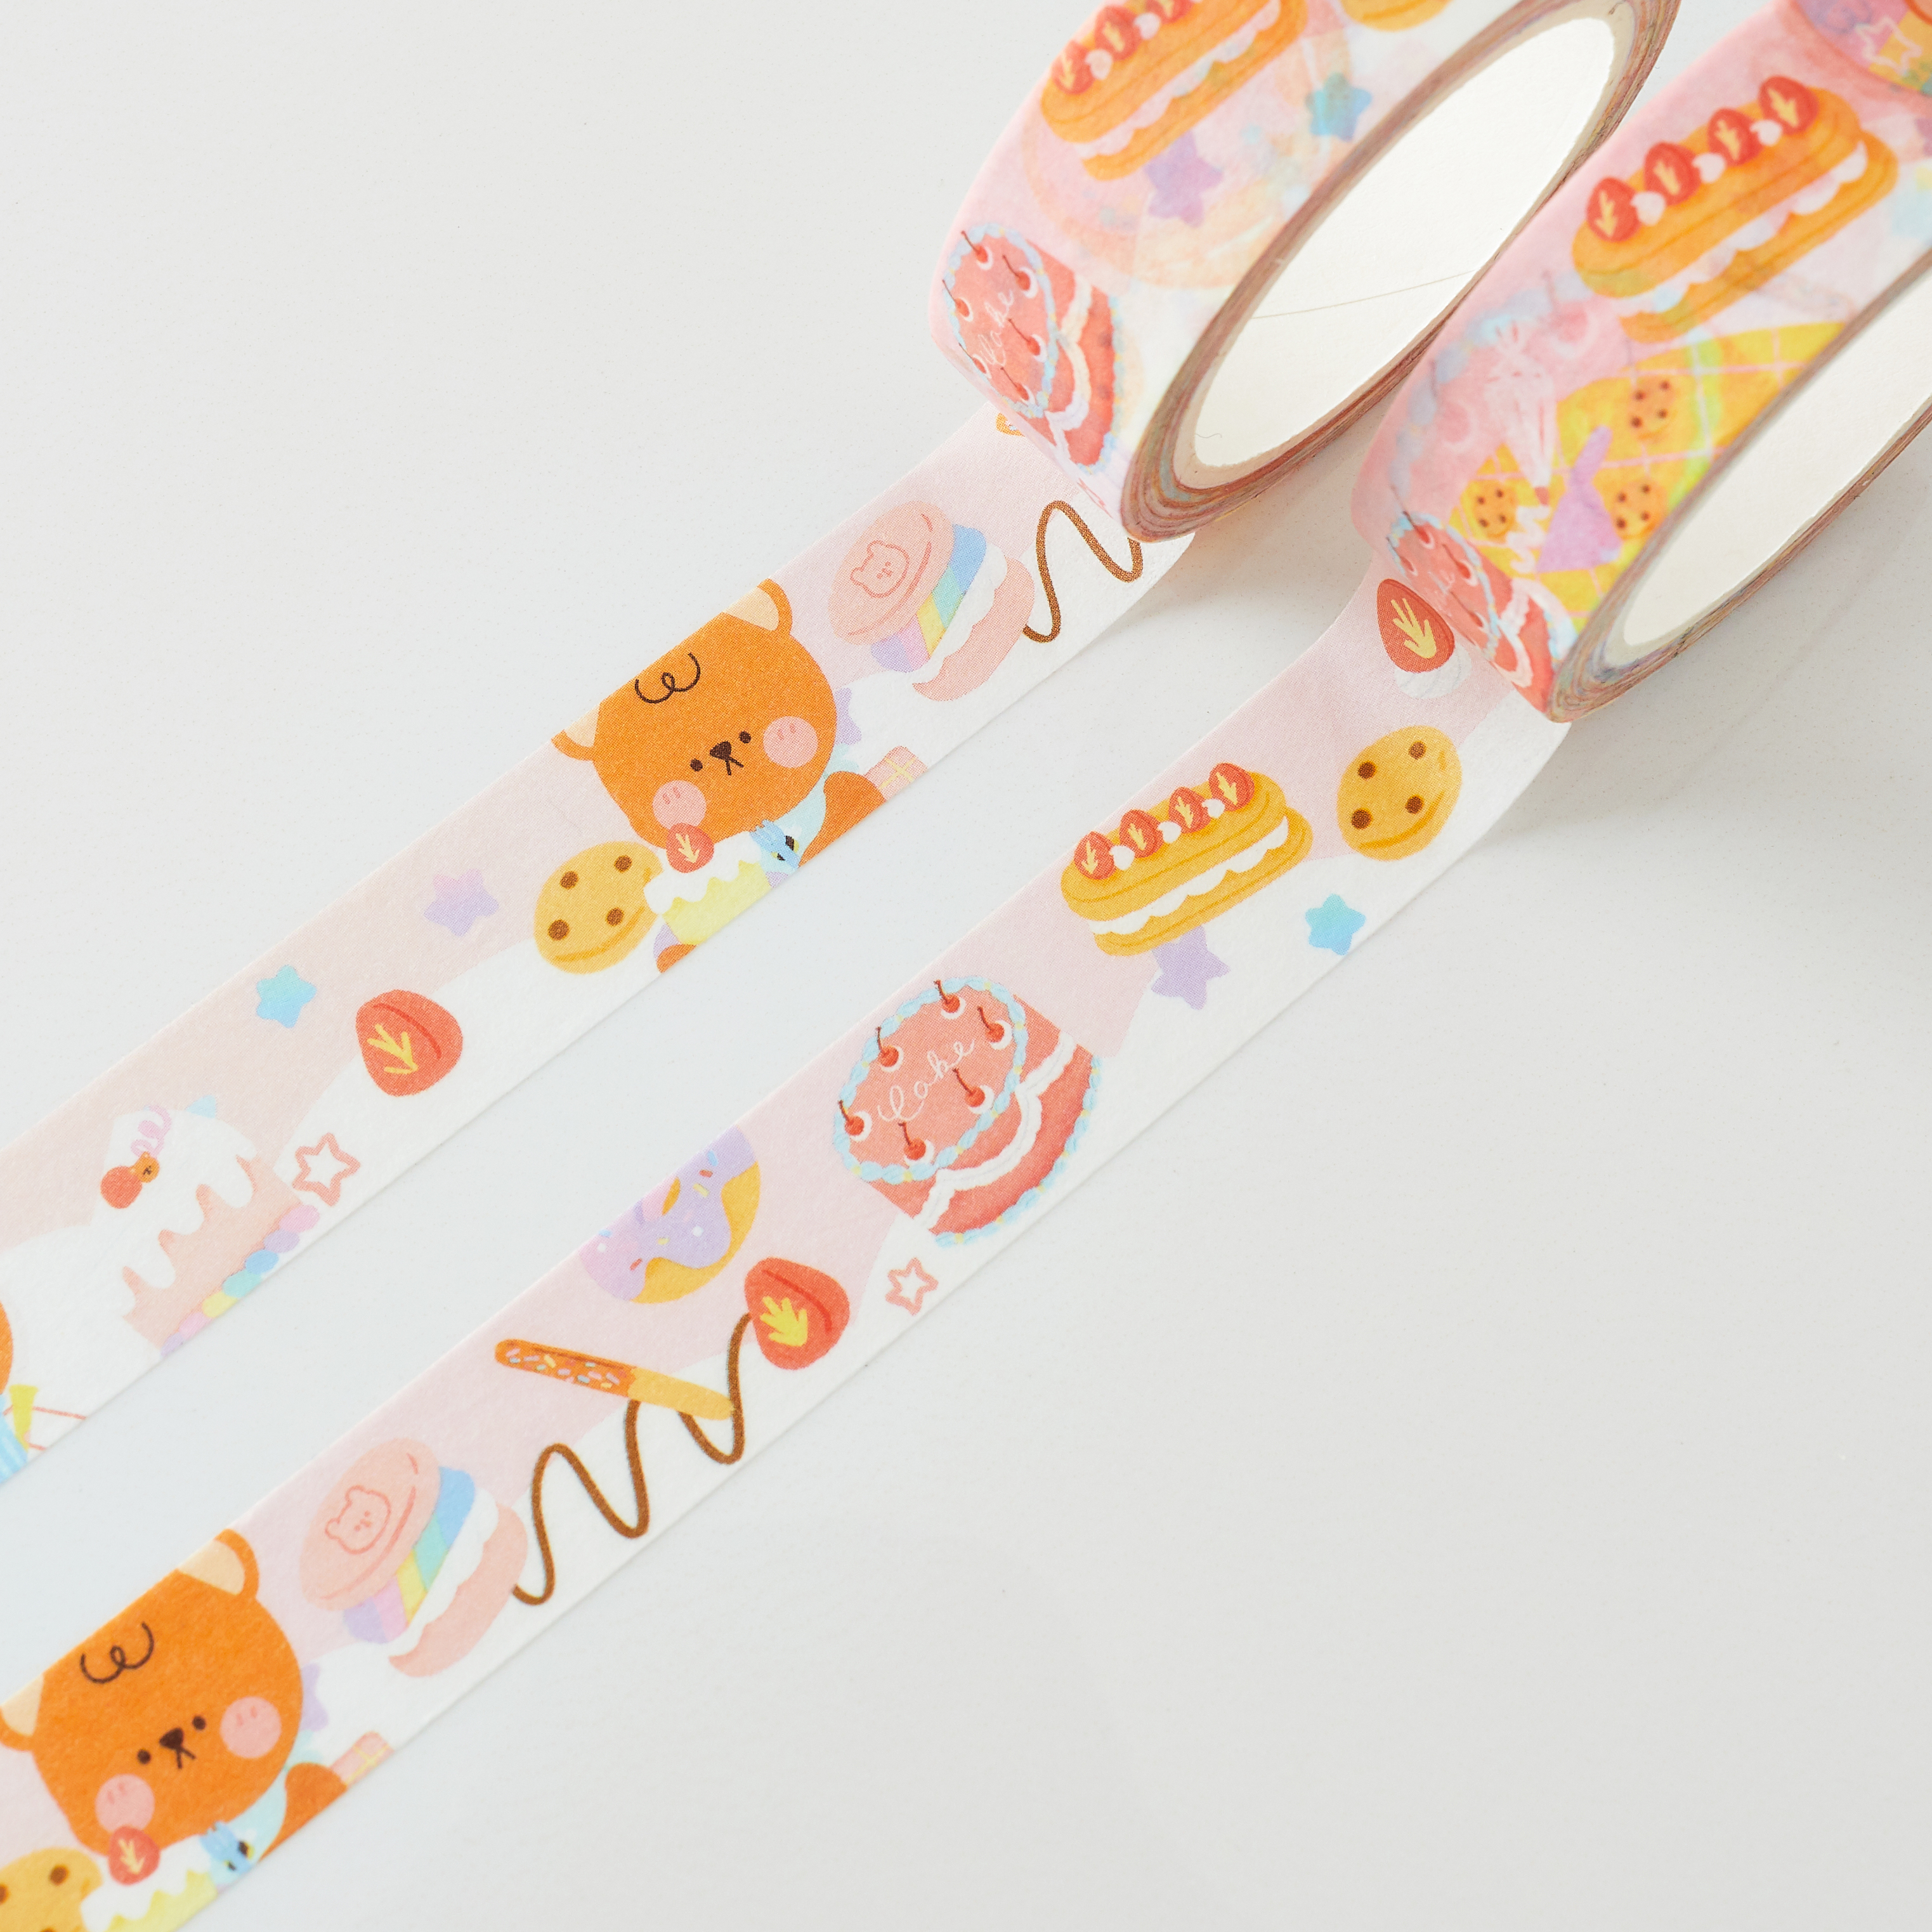 custom printable masking tape washi tape with your own designs (6).jpg